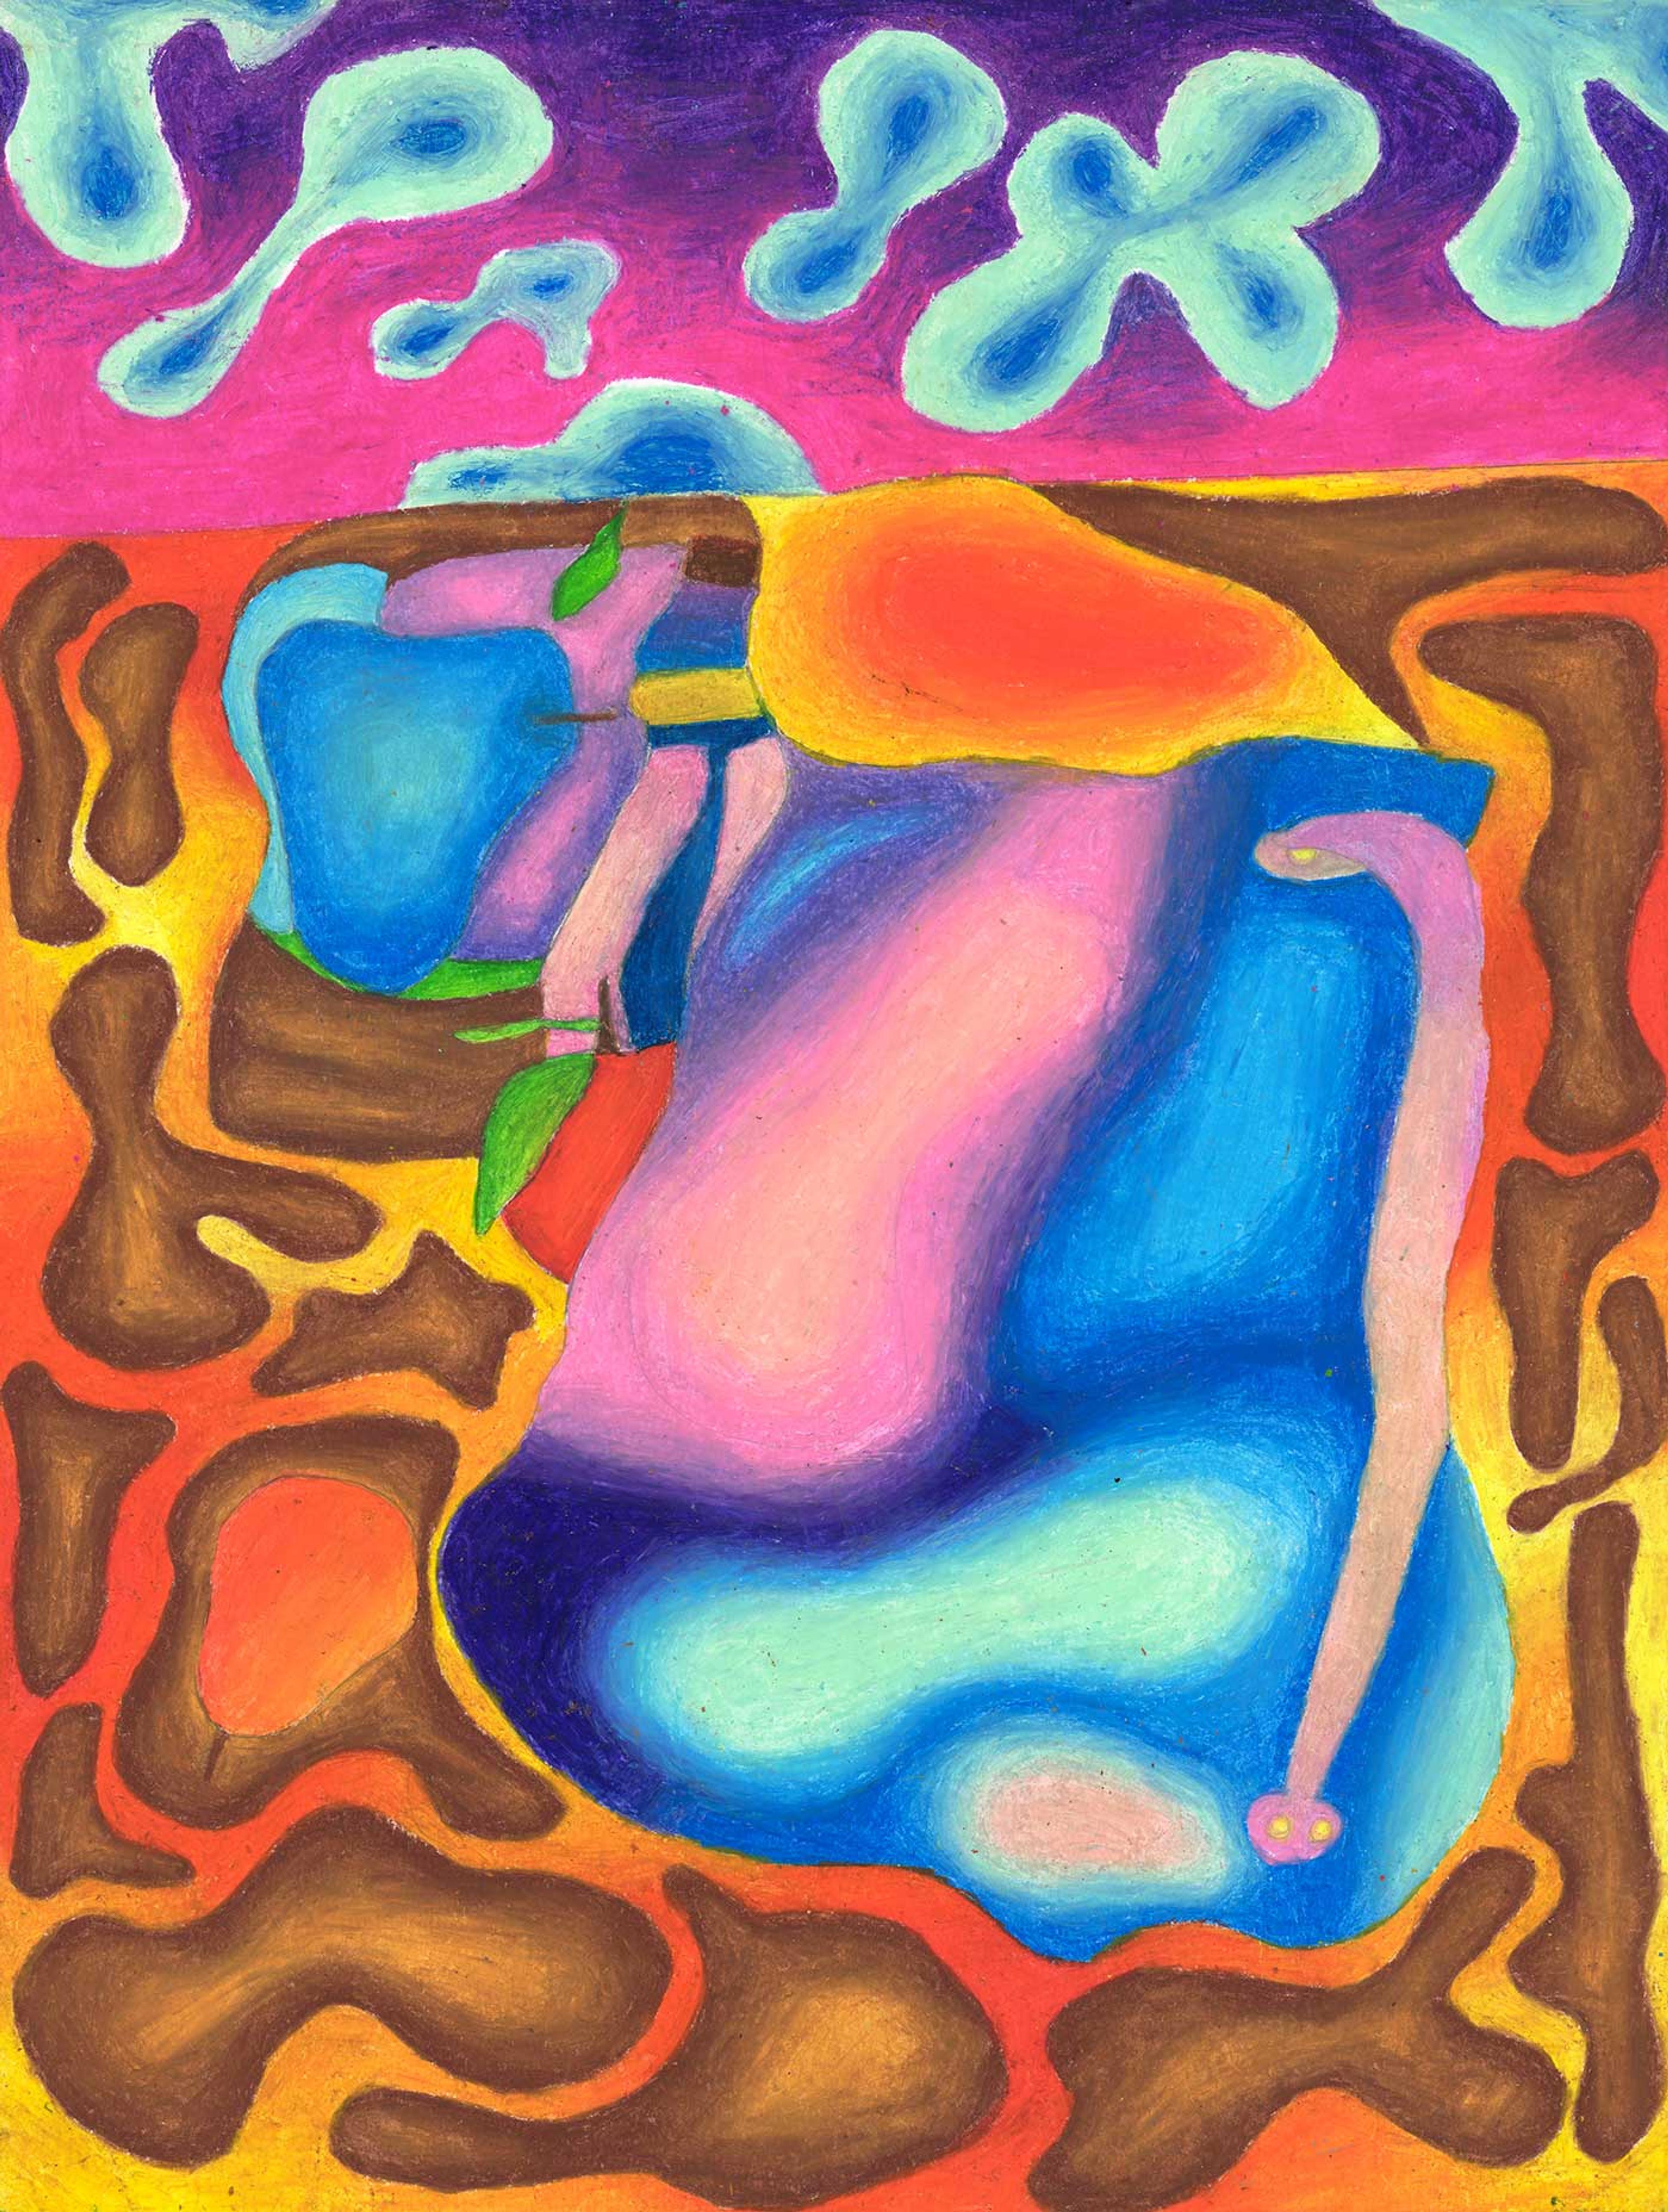 Still life painting with abstract shapes and various colors.